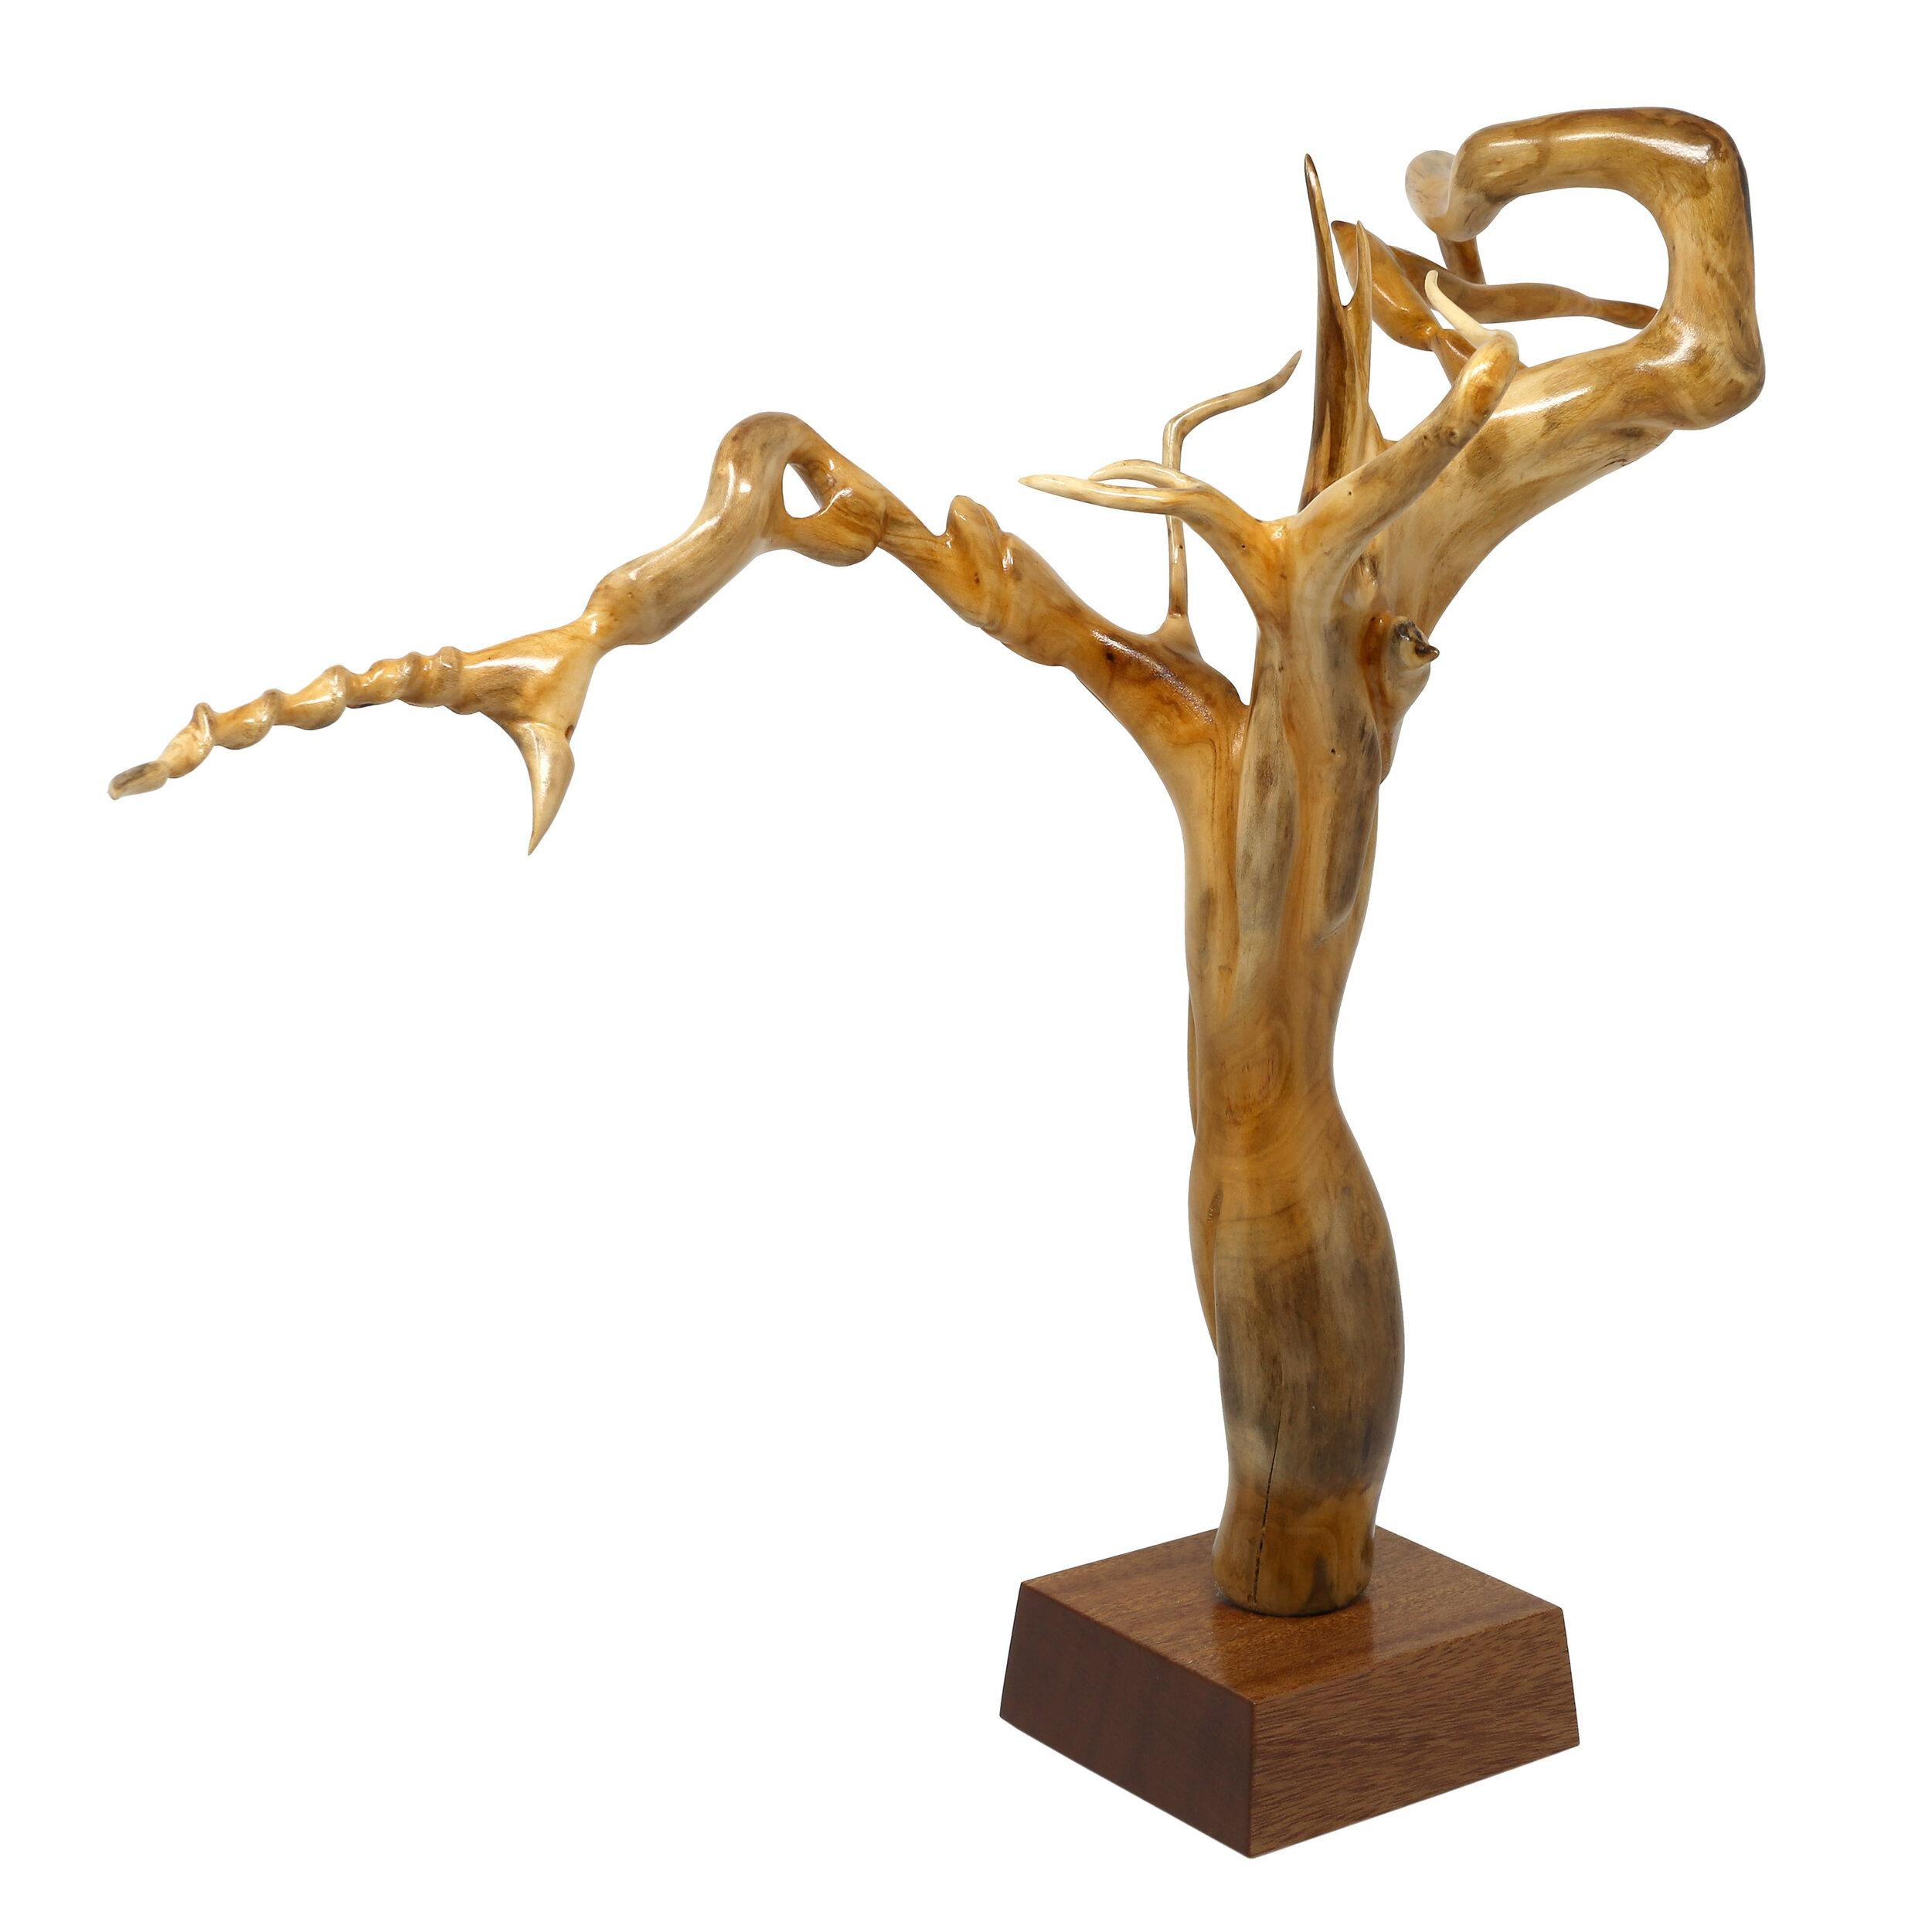 Original, carved by hand, wood sculpture

2021

Carved driftwood on an African mahogany base

Measures: 16.5 x 20.5 x 8 in / 42 x 52 x 20 cm.